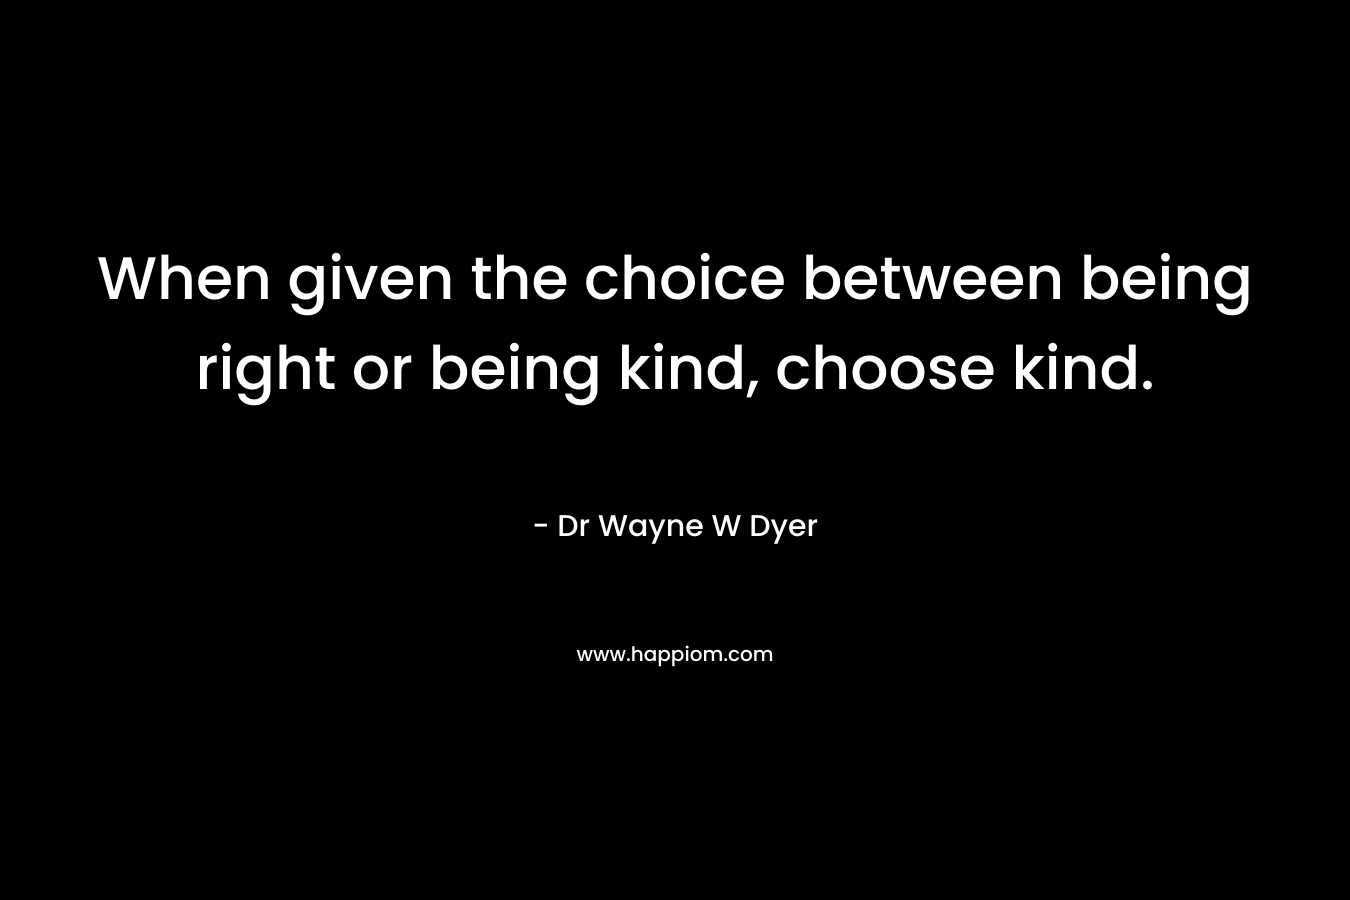 When given the choice between being right or being kind, choose kind.